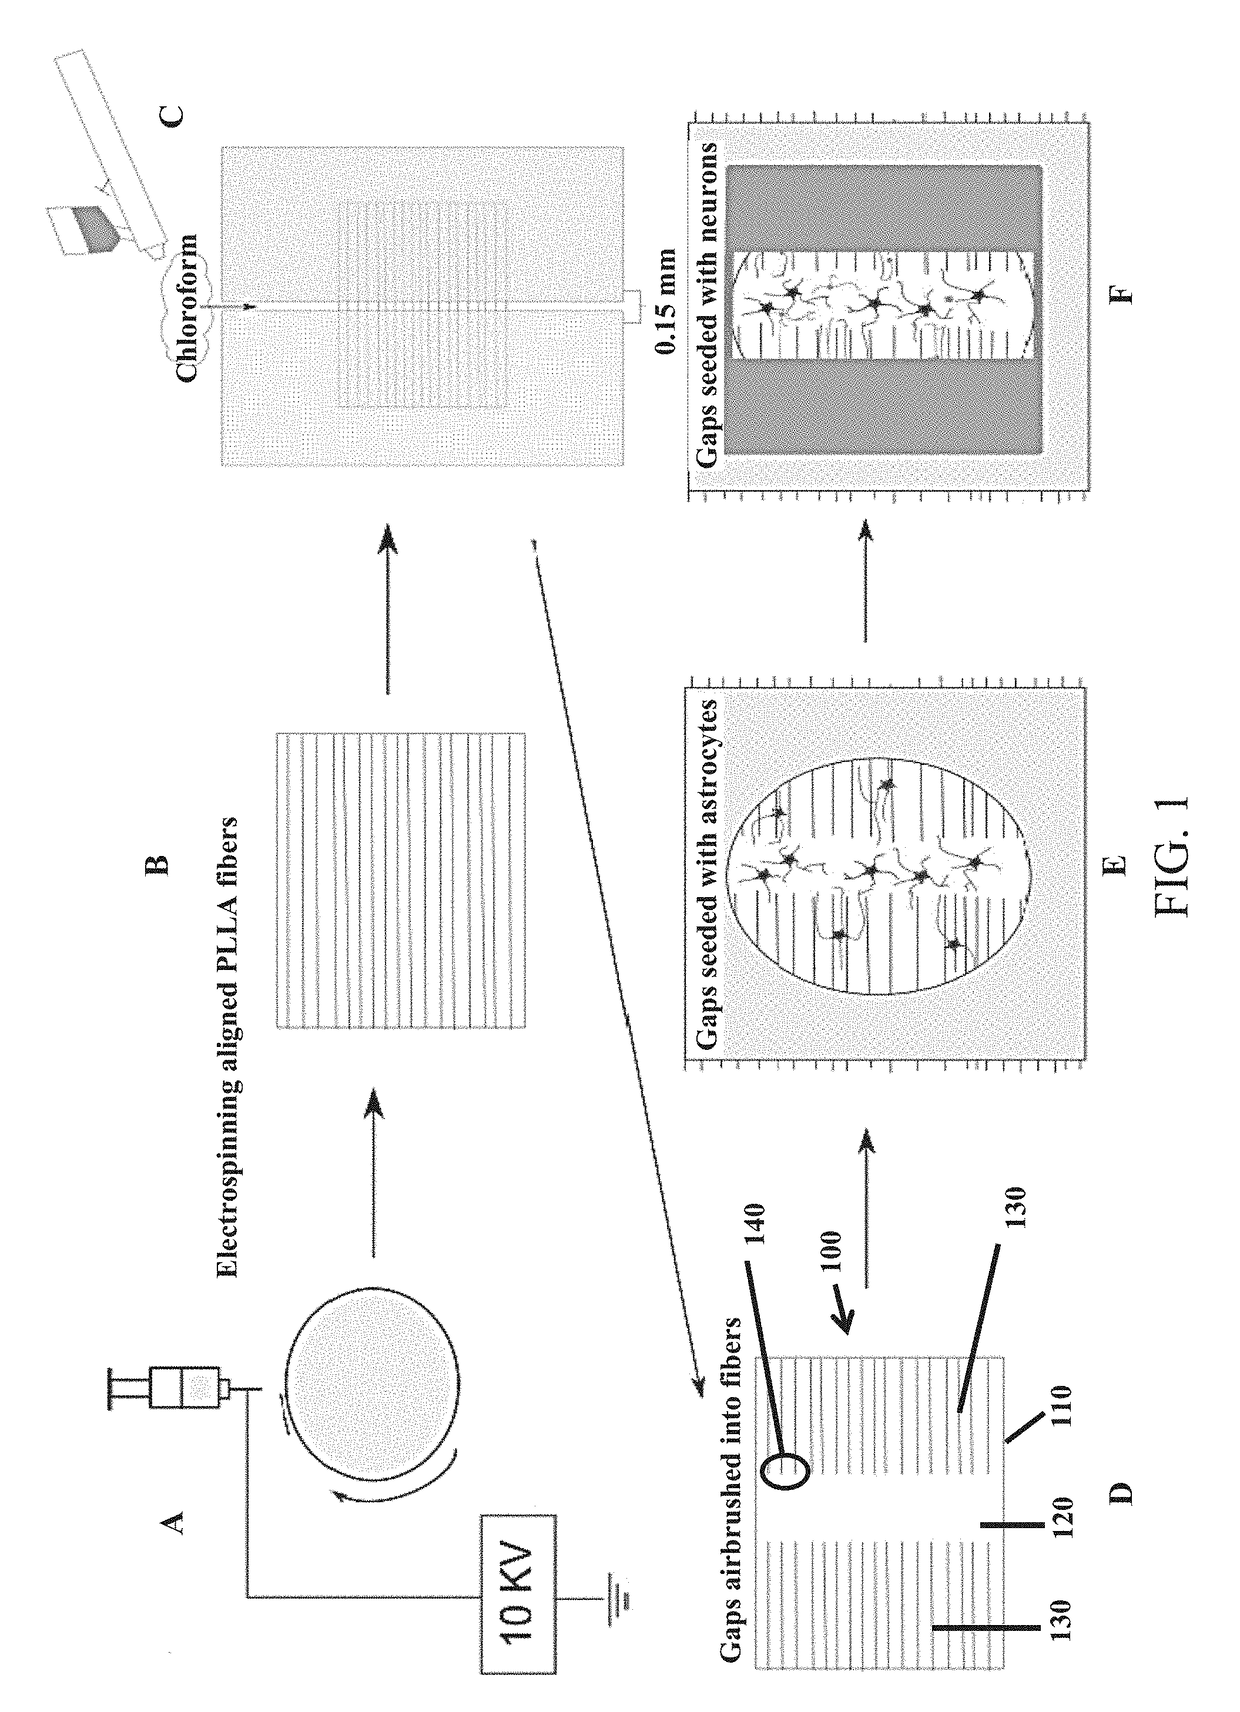 In vitro culture model of anisotropic to isotropic transitions